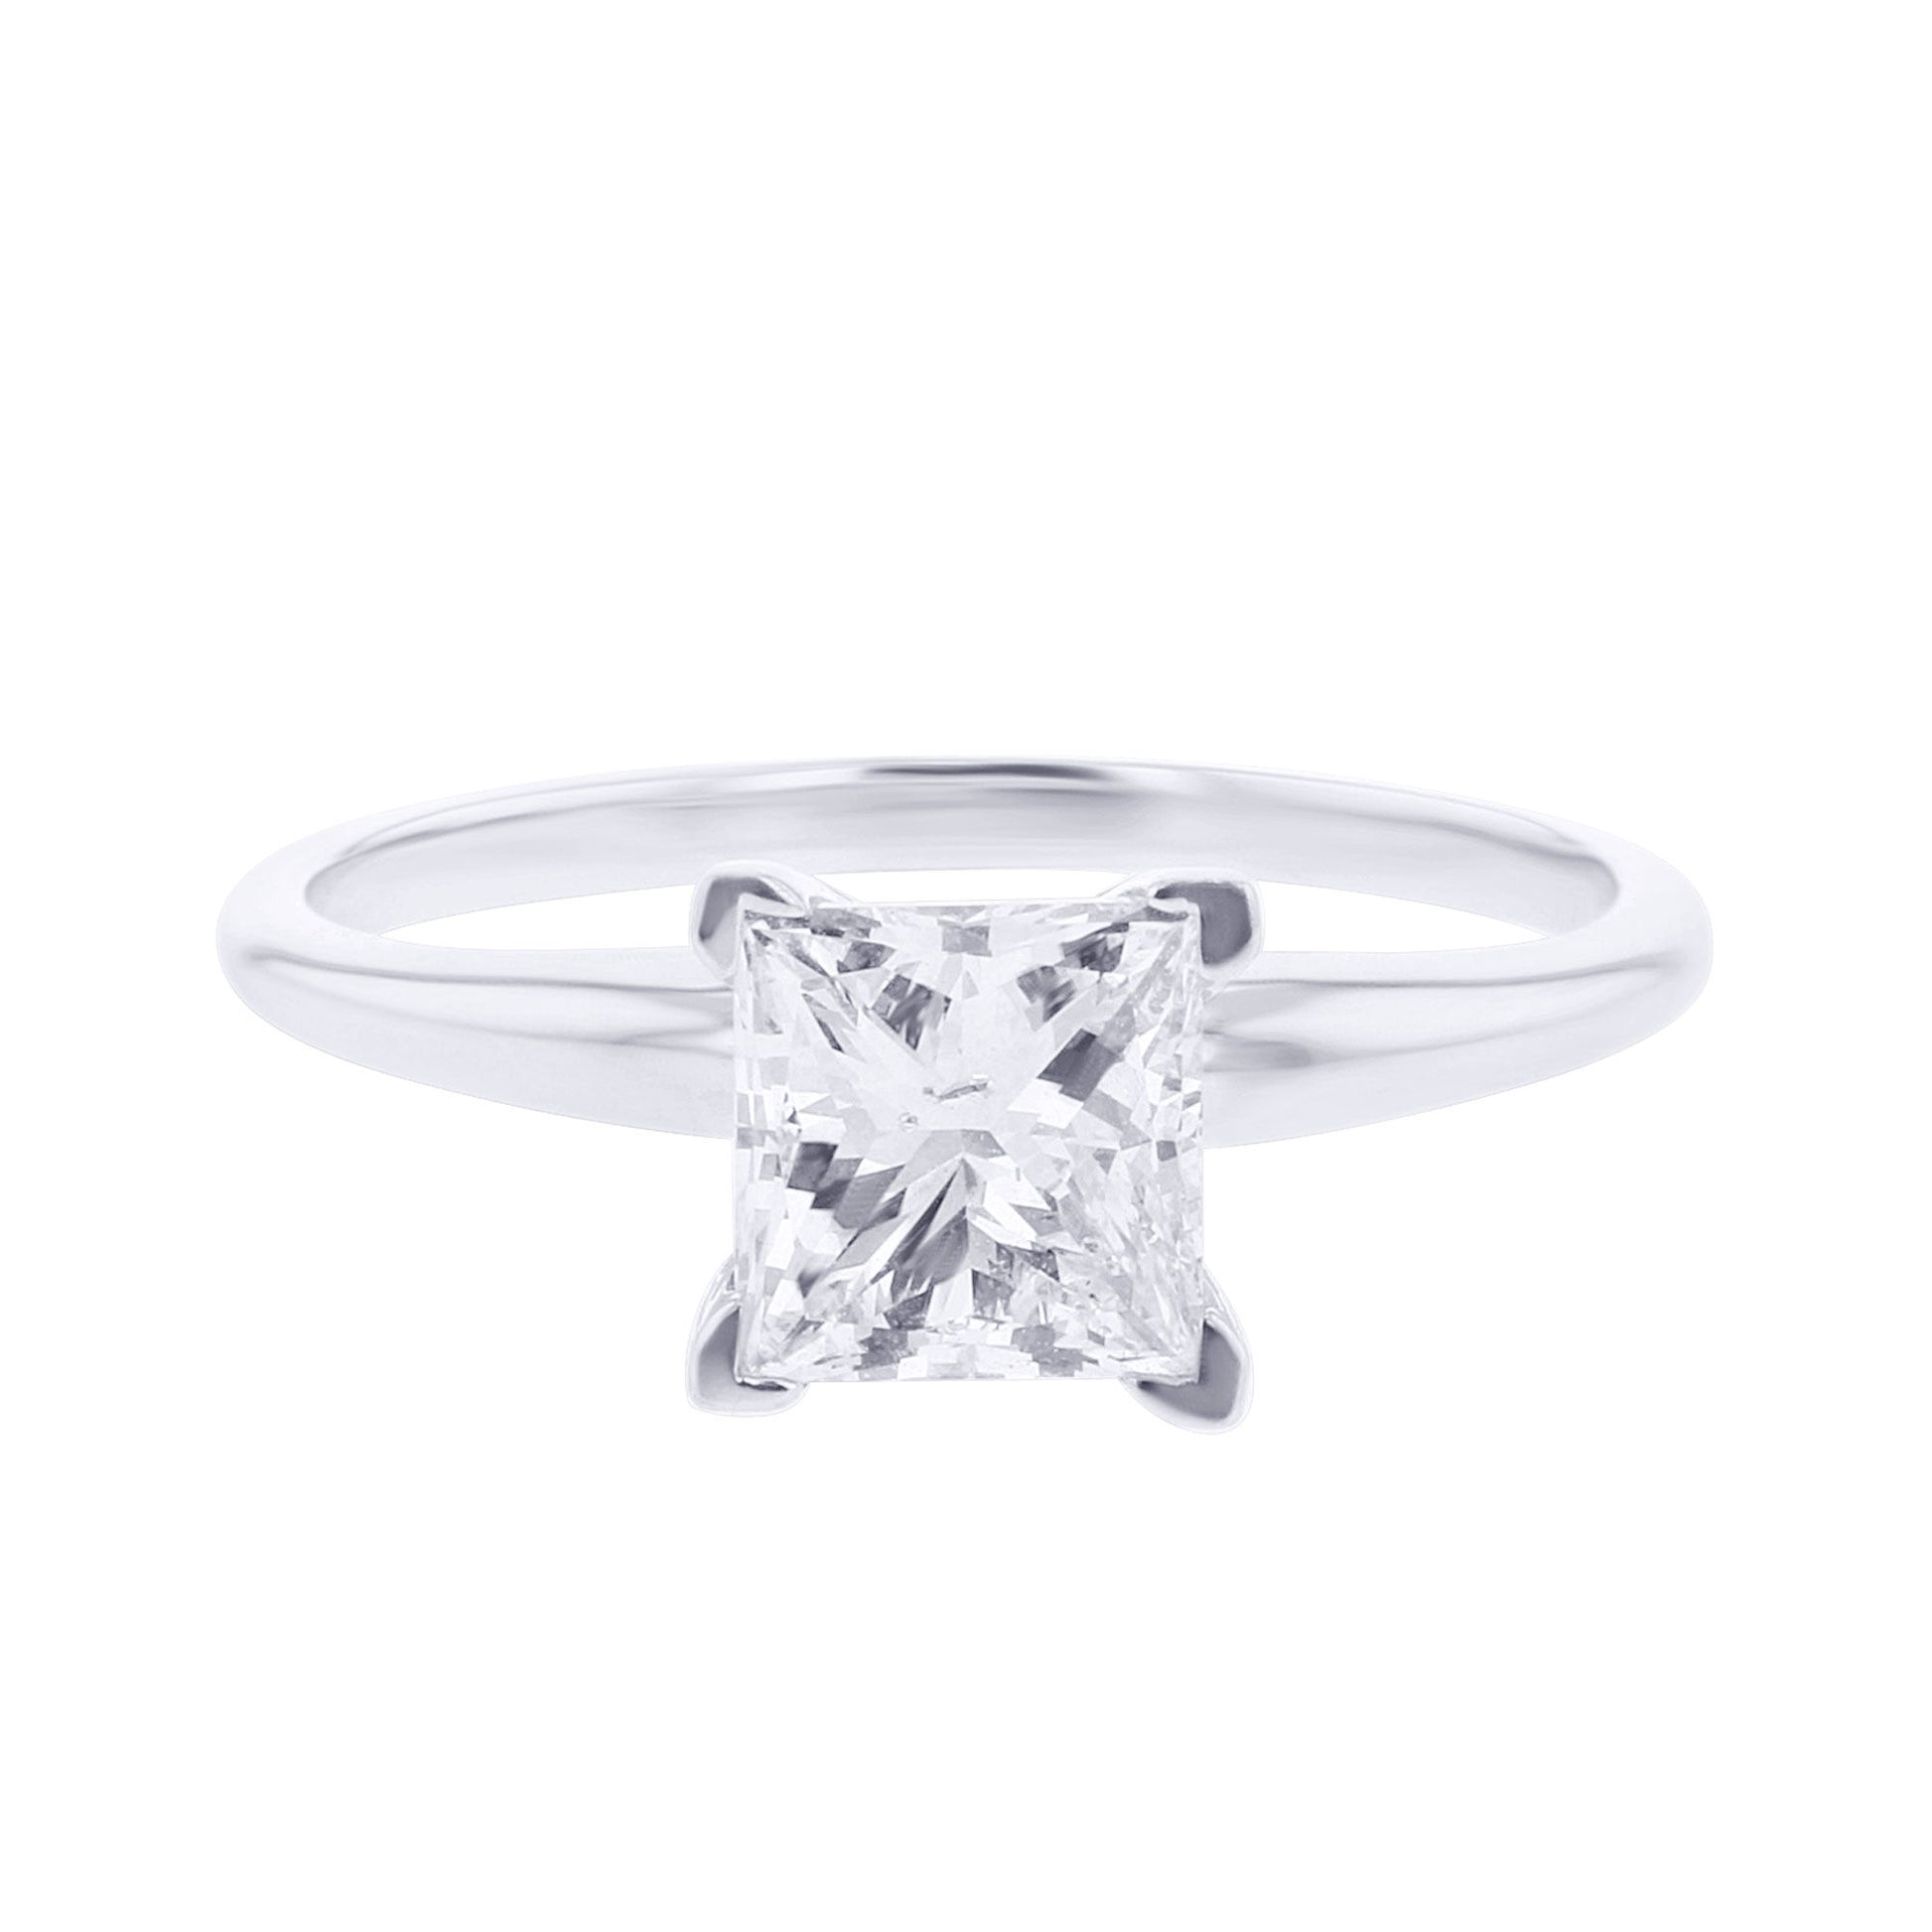 Classic Princess Solitaire Ready for Love Diamond Engagement Ring 1 1/2ct